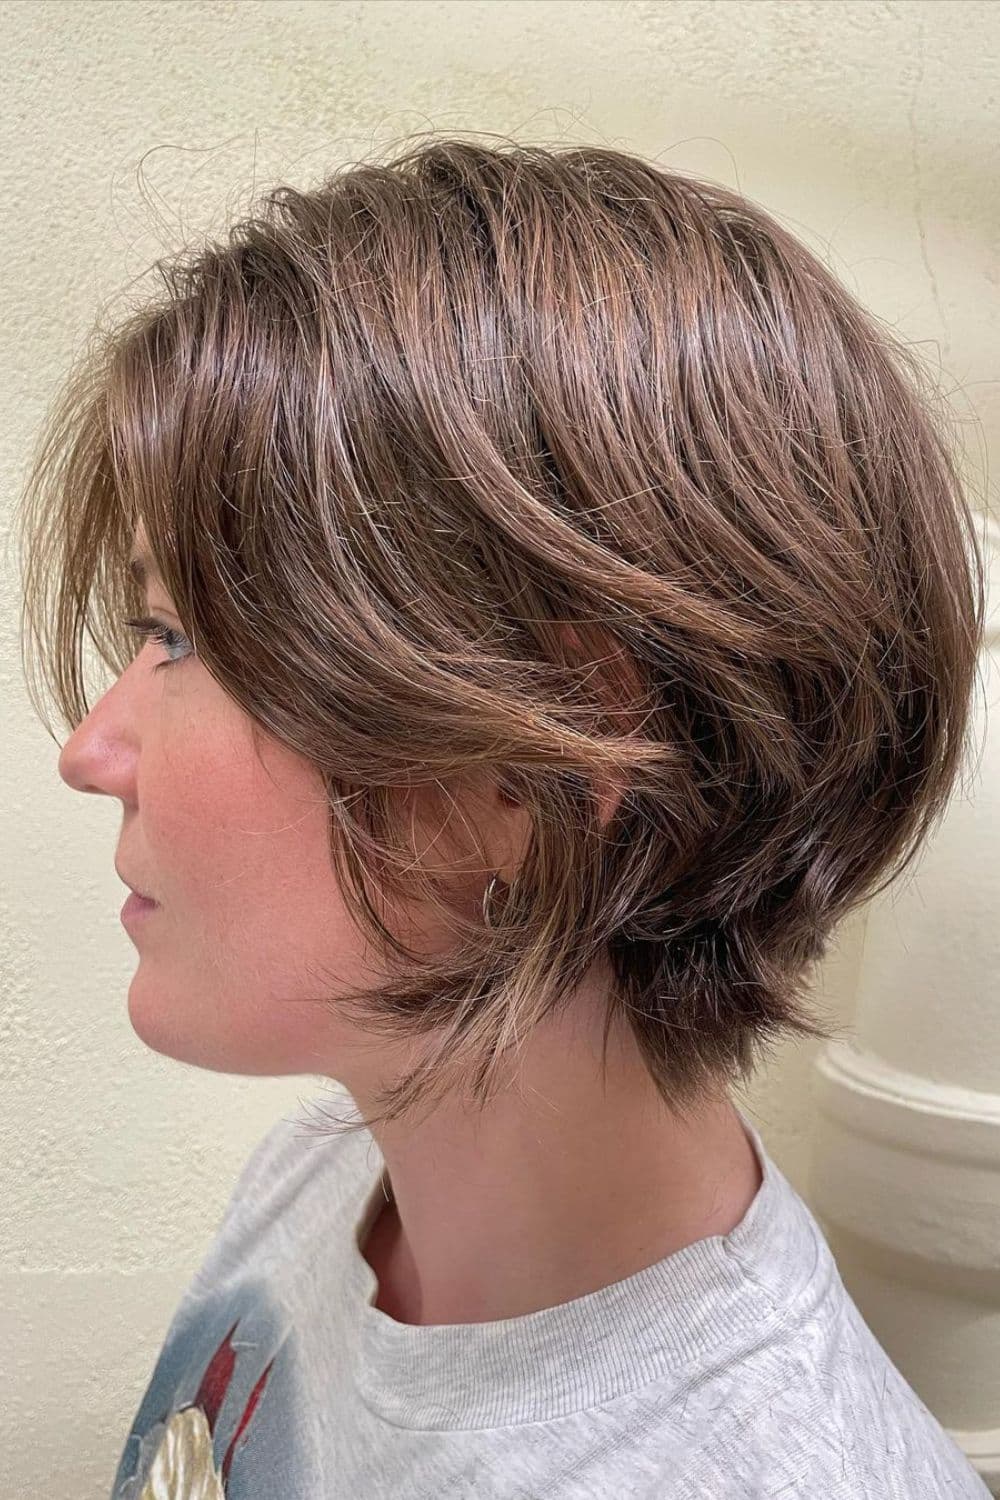 Side view of a woman with a classic short layered cut.